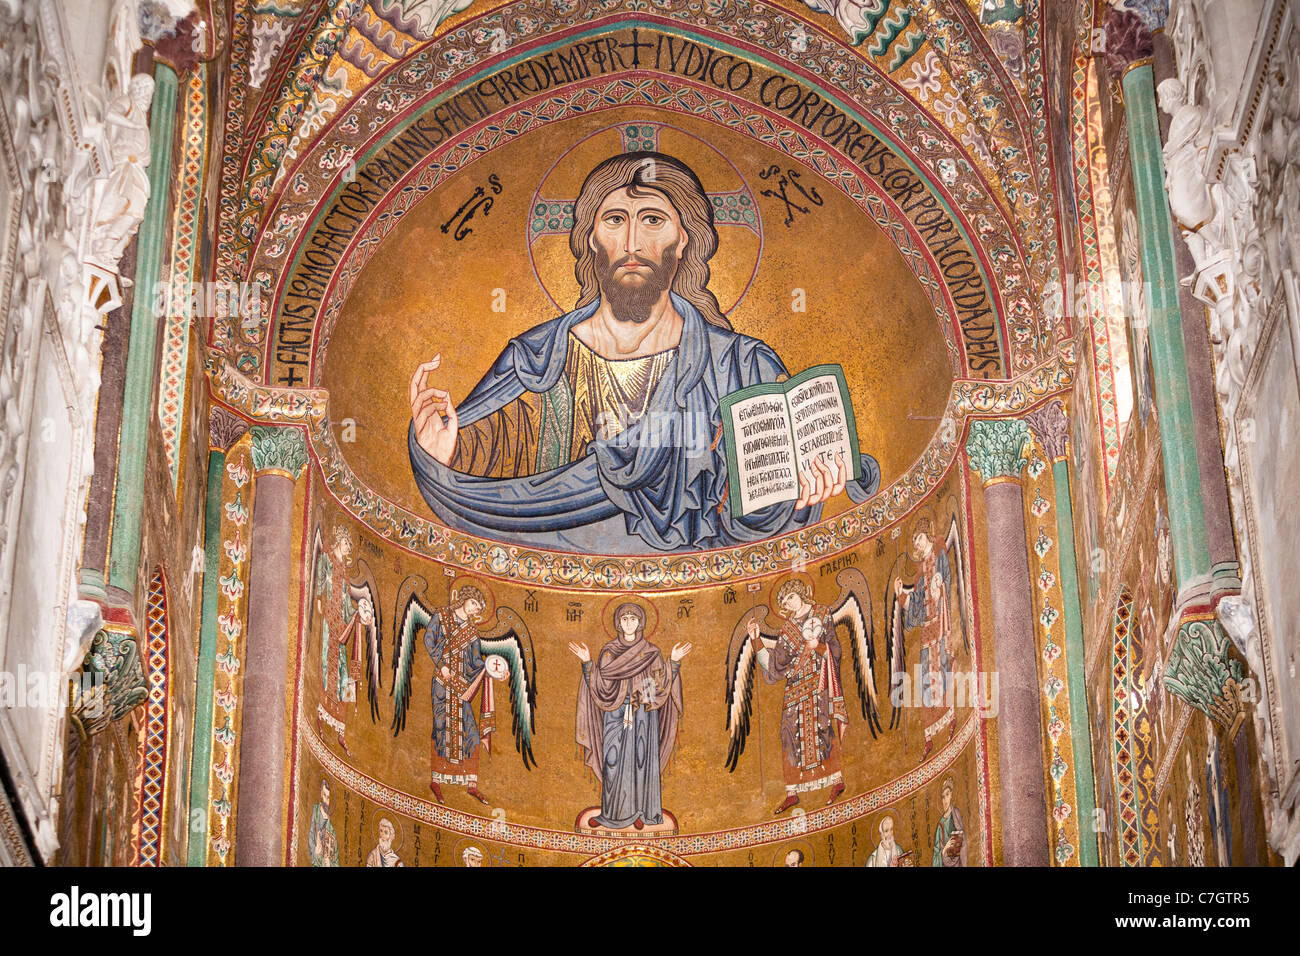 Byzantine mosaic of Christ on the ceiling of Cefalu Cathedral, Piazza Duomo, Cefalu, Sicily, Italy Stock Photo